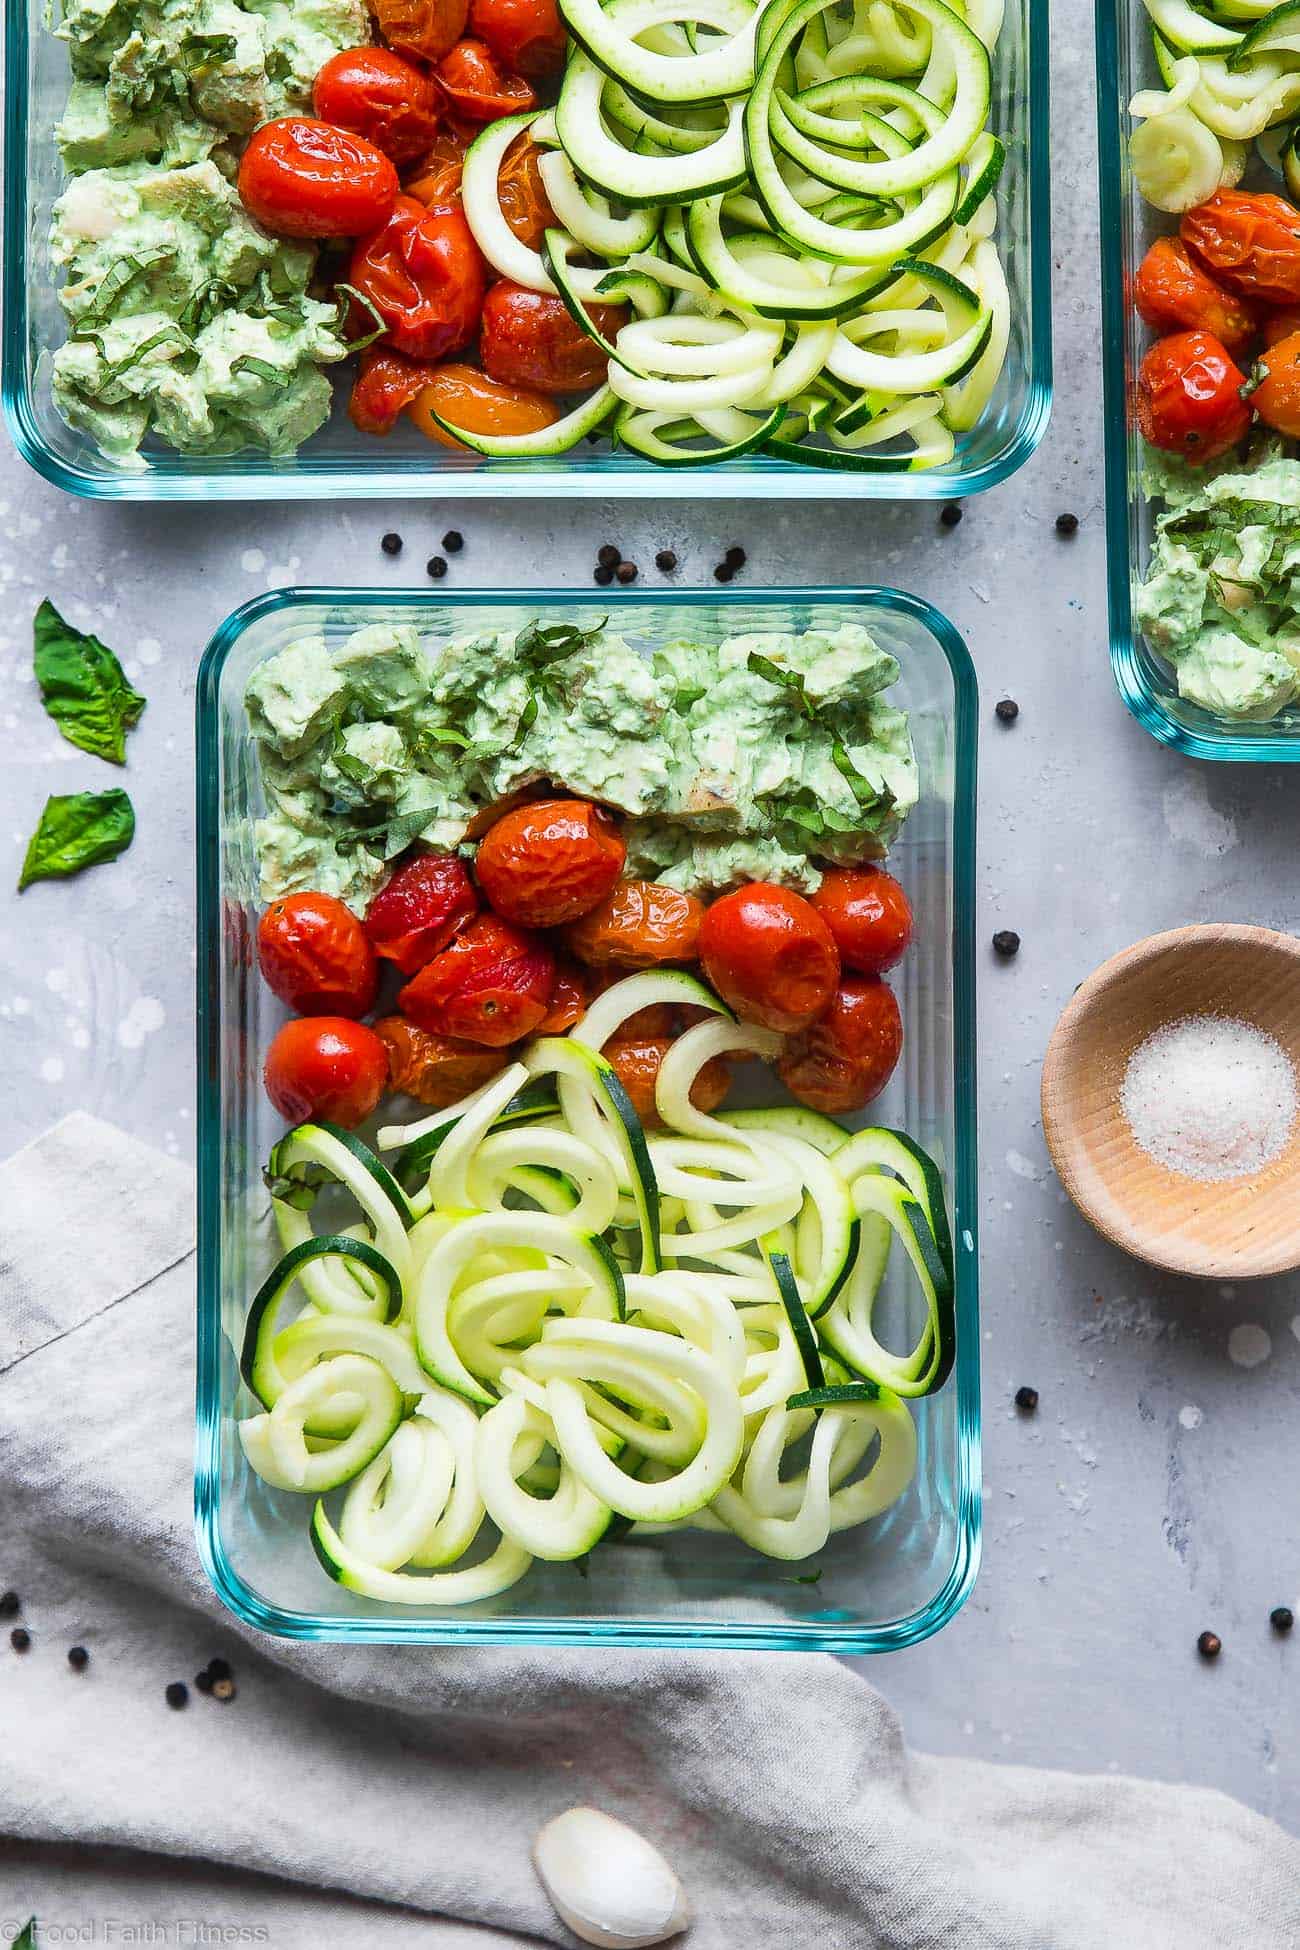 Greek Yogurt Pesto Chicken & Zucchini Noodle Meal prep Bowls - An easy, low carb, gluten free and protein packed work lunch! A healthy meal for kids or adults that's only 260 calories and 3 Freestyle points! | #Foodfaithfitness | #Lowcarb #glutenfree #healthy #mealprep #Greekyogurt